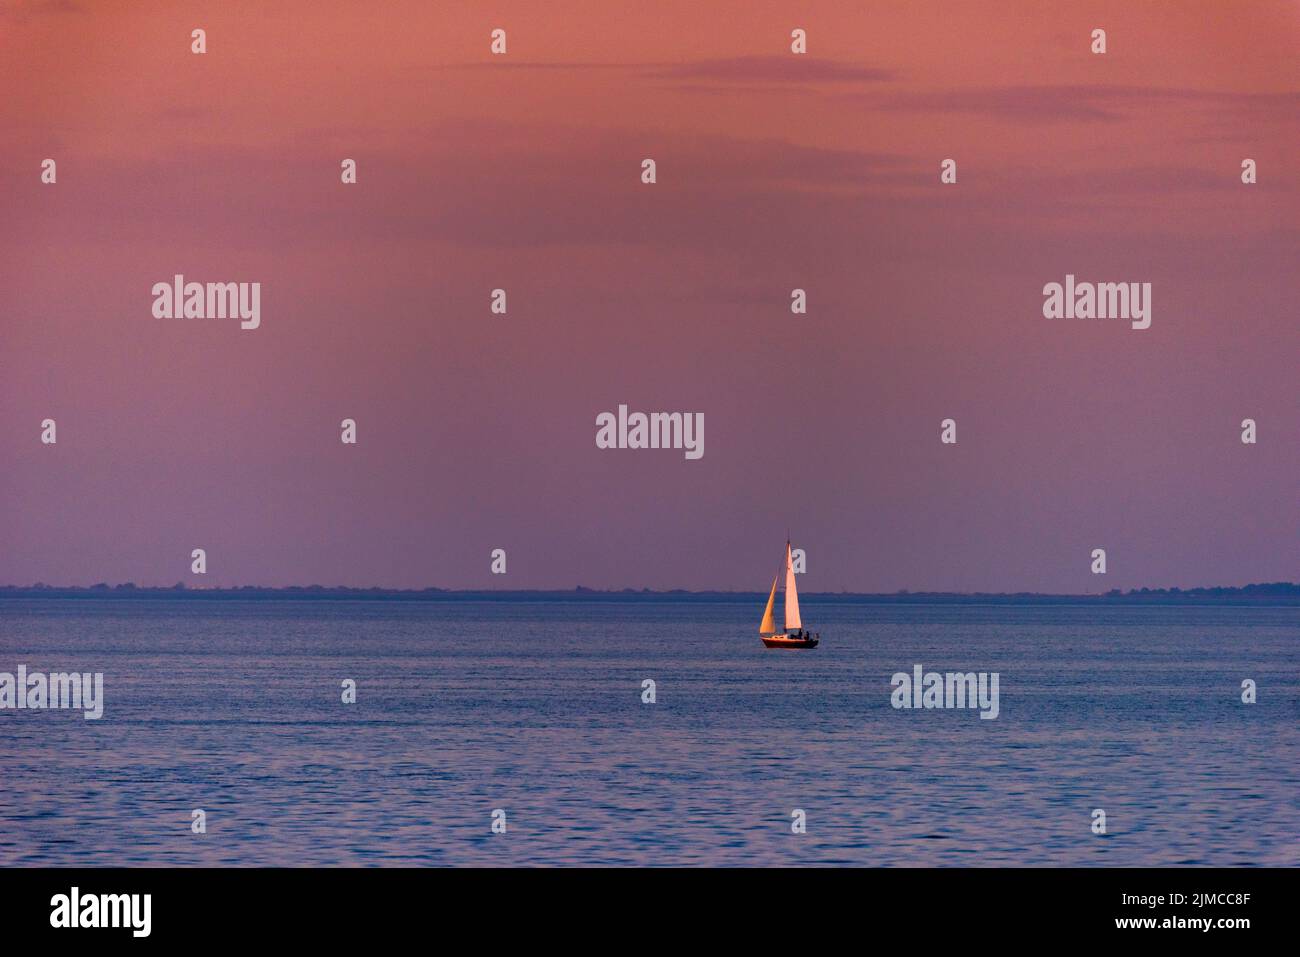 A singe sailboat floats on Mobile Bay at sunset. Stock Photo